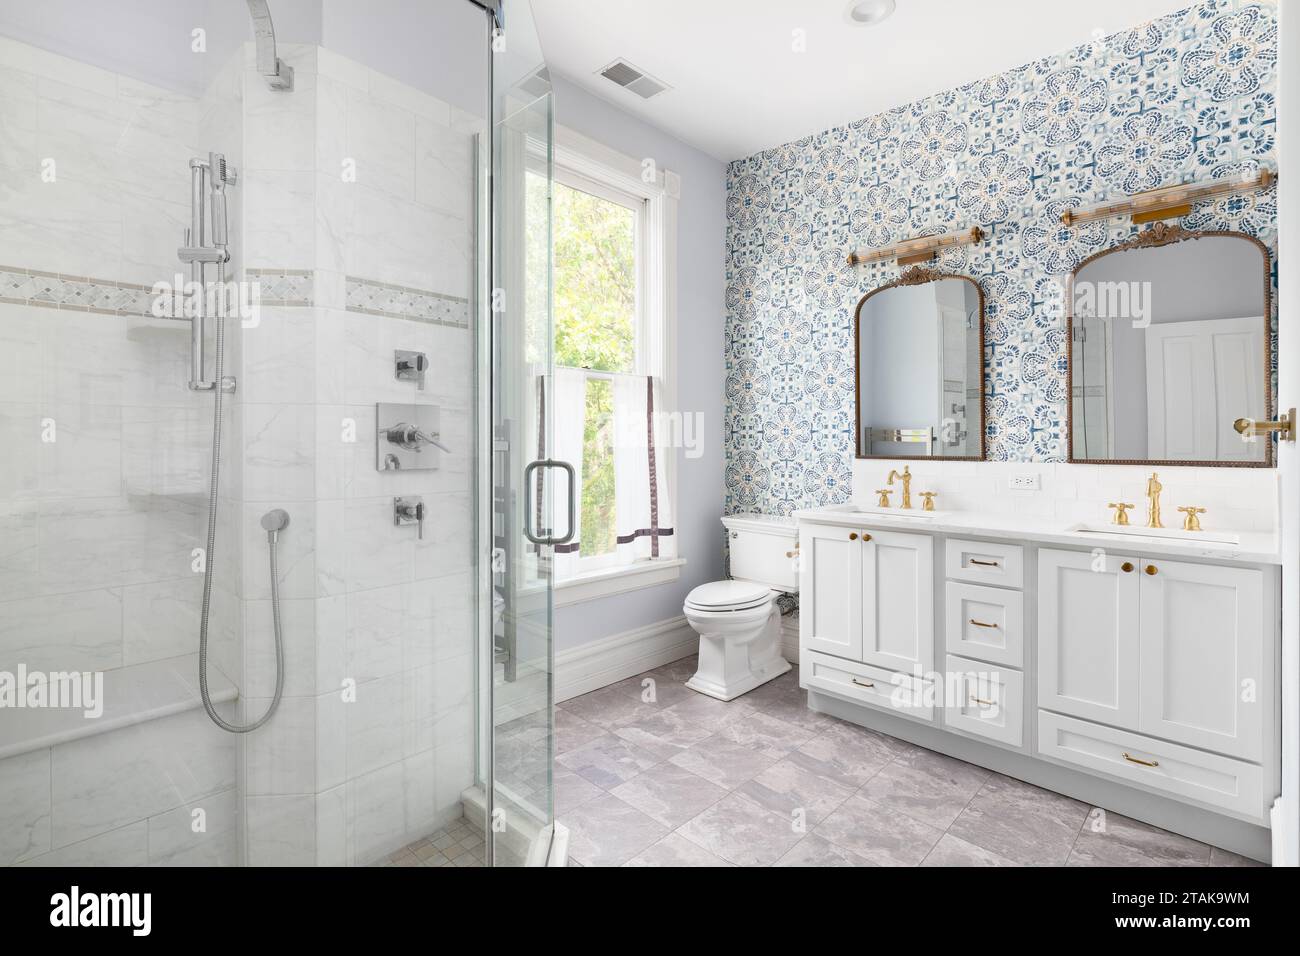 A cozy bathroom with a patterened blue wallpaper, grey cabinet, gold faucet and mirrors, and a tiled walk-in shower. Stock Photo